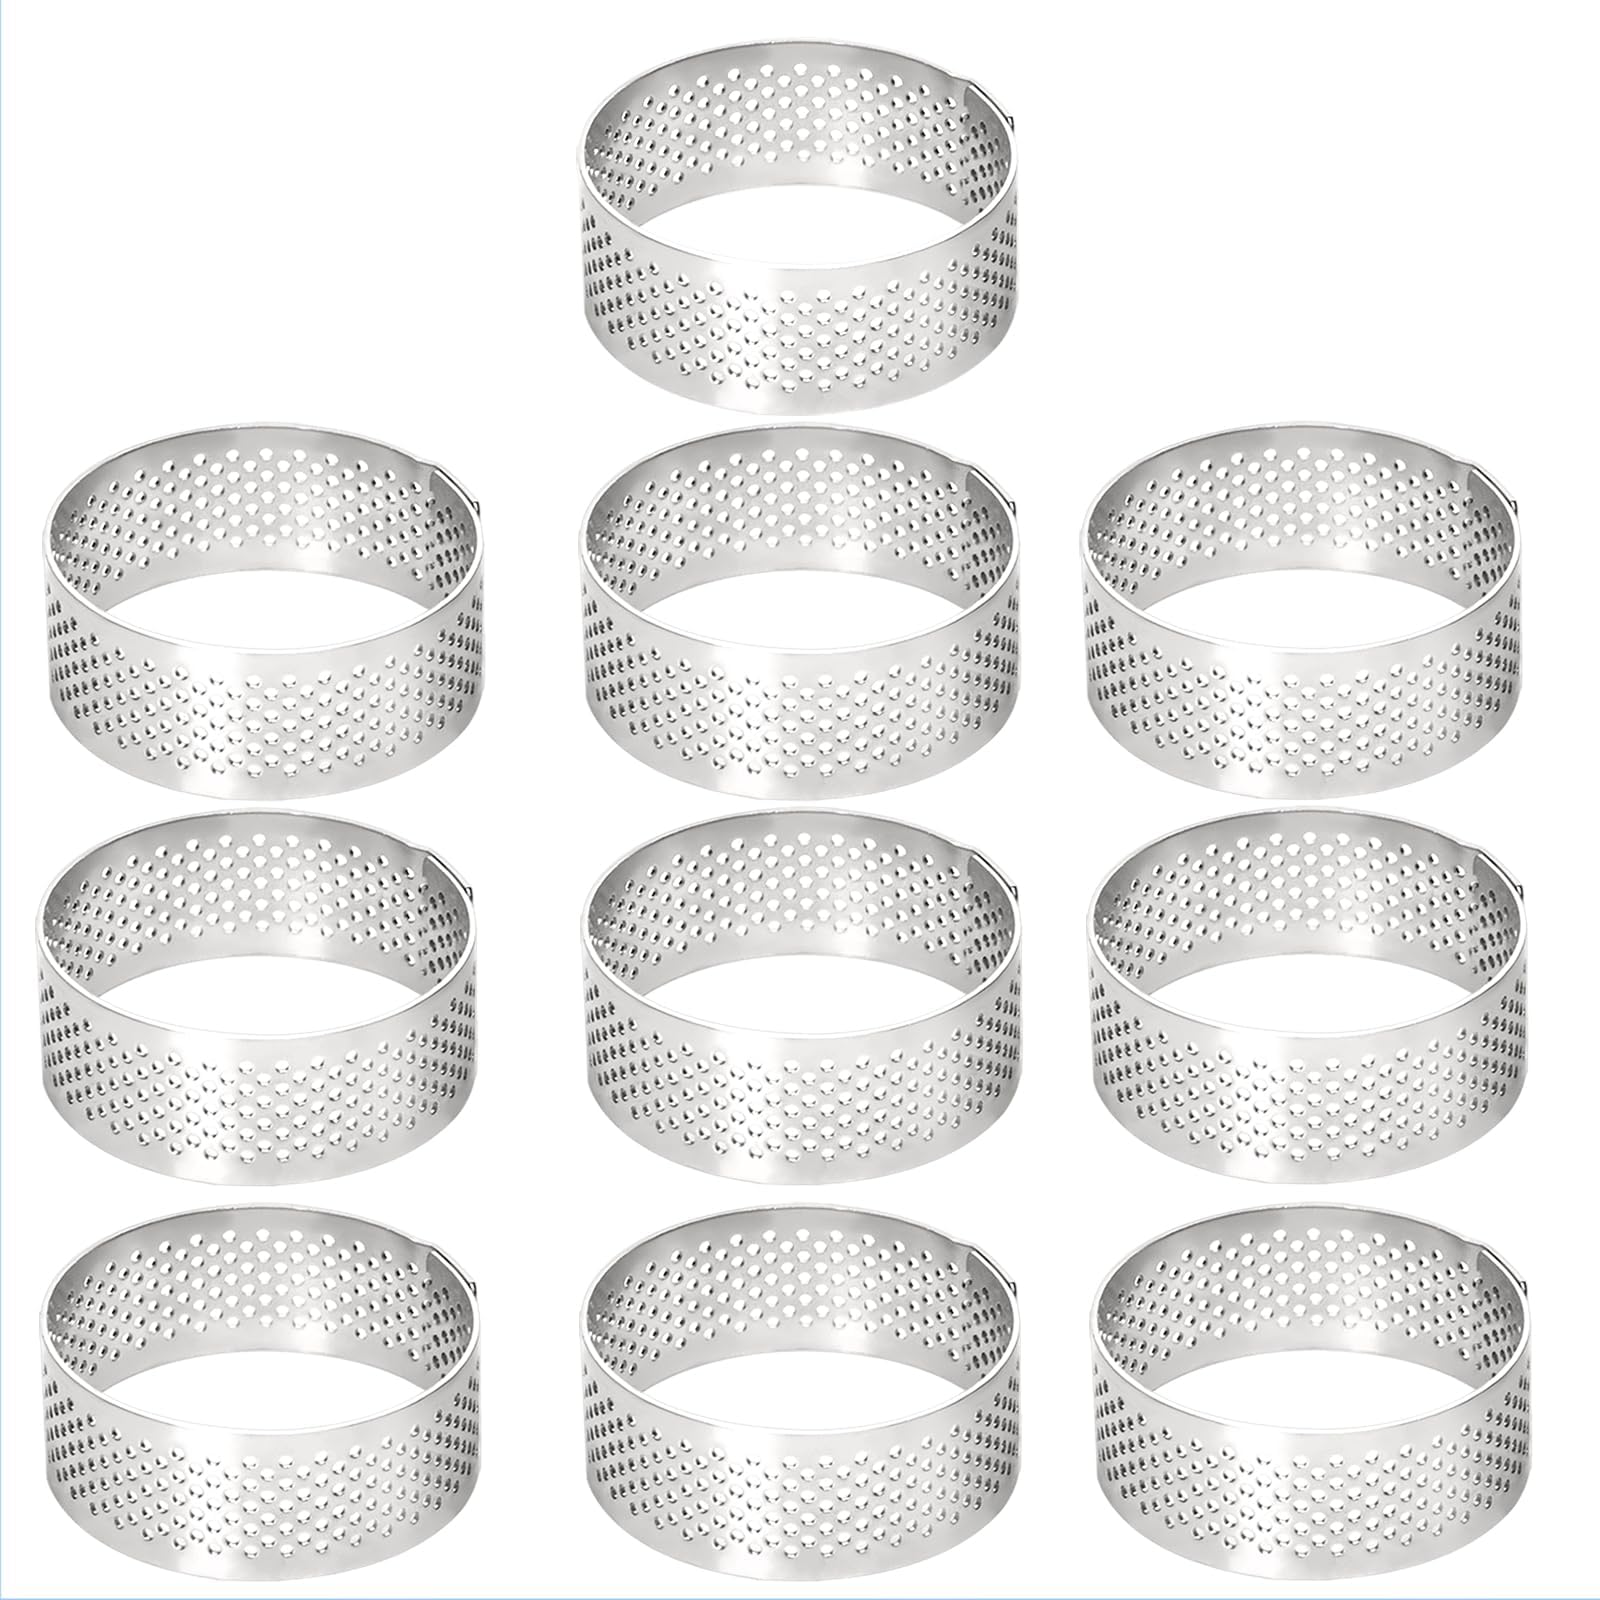 10 Pcs 1.98 Inch Stainless Steel Tart Ring, Heat-Resistant Perforated Cake Mousse Ring, Round Ring Baking doughnut tools 5cm